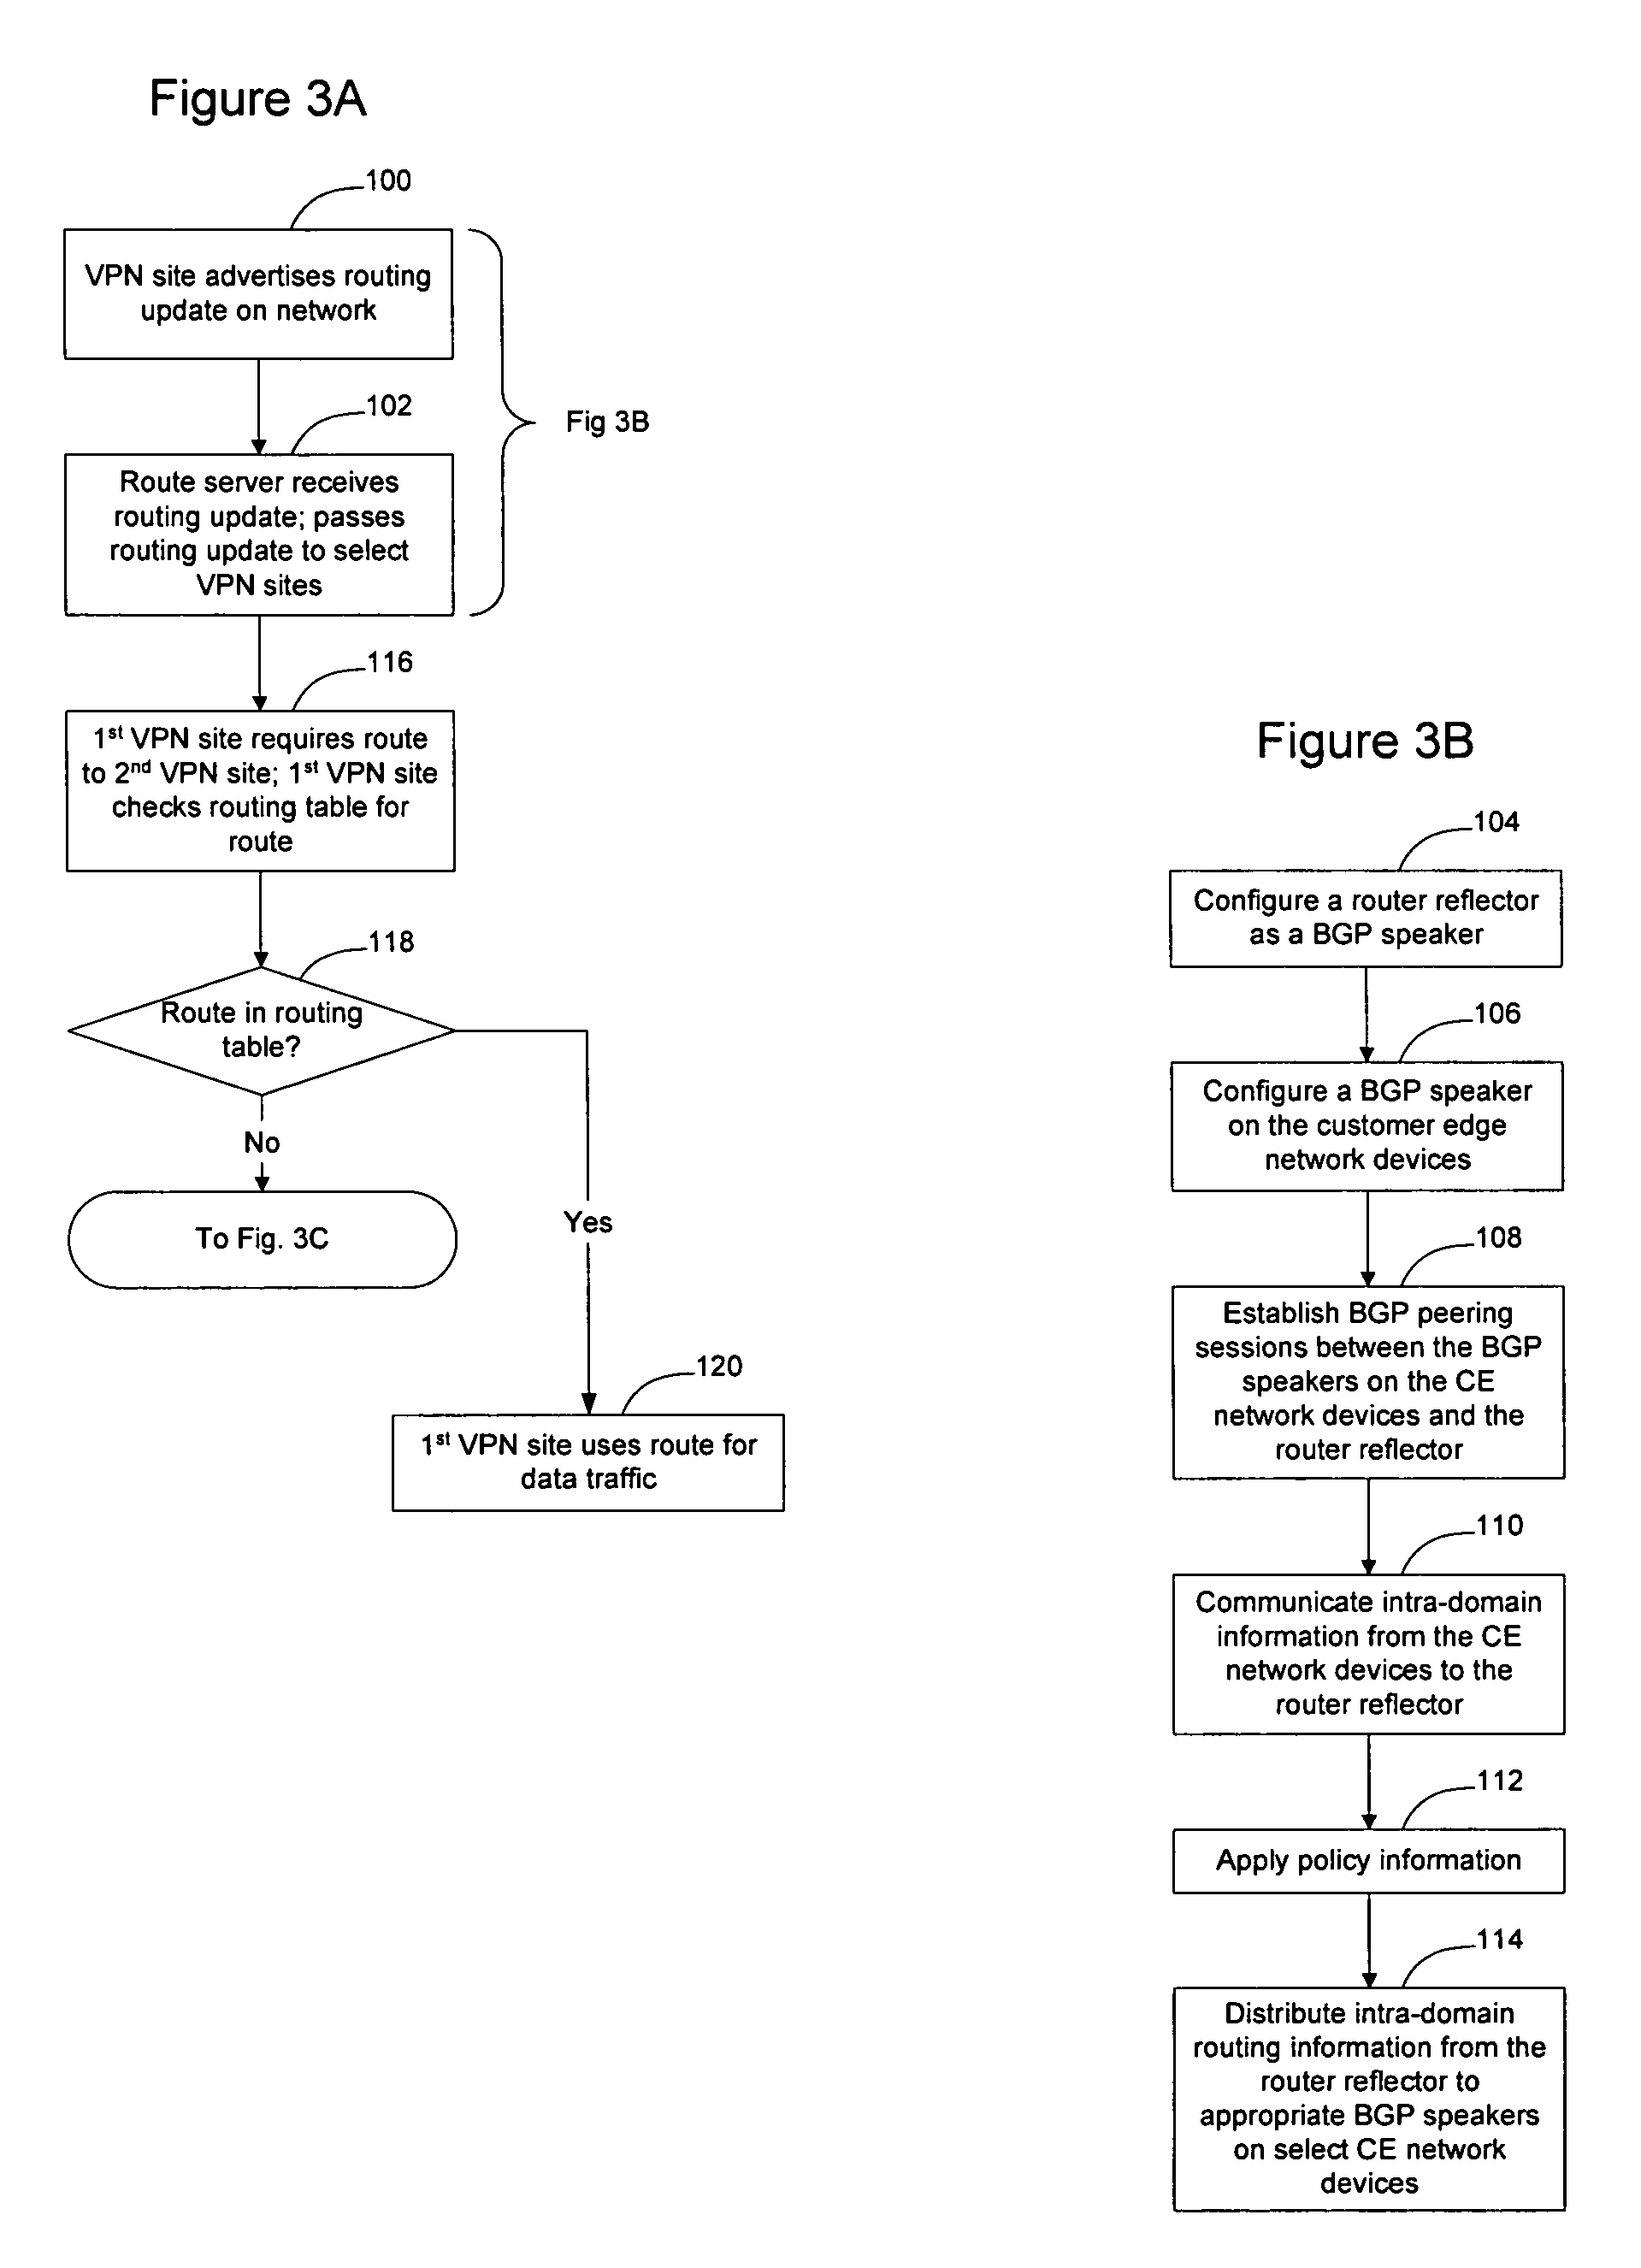 Method and apparatus for obtaining routing information on demand in a virtual private network